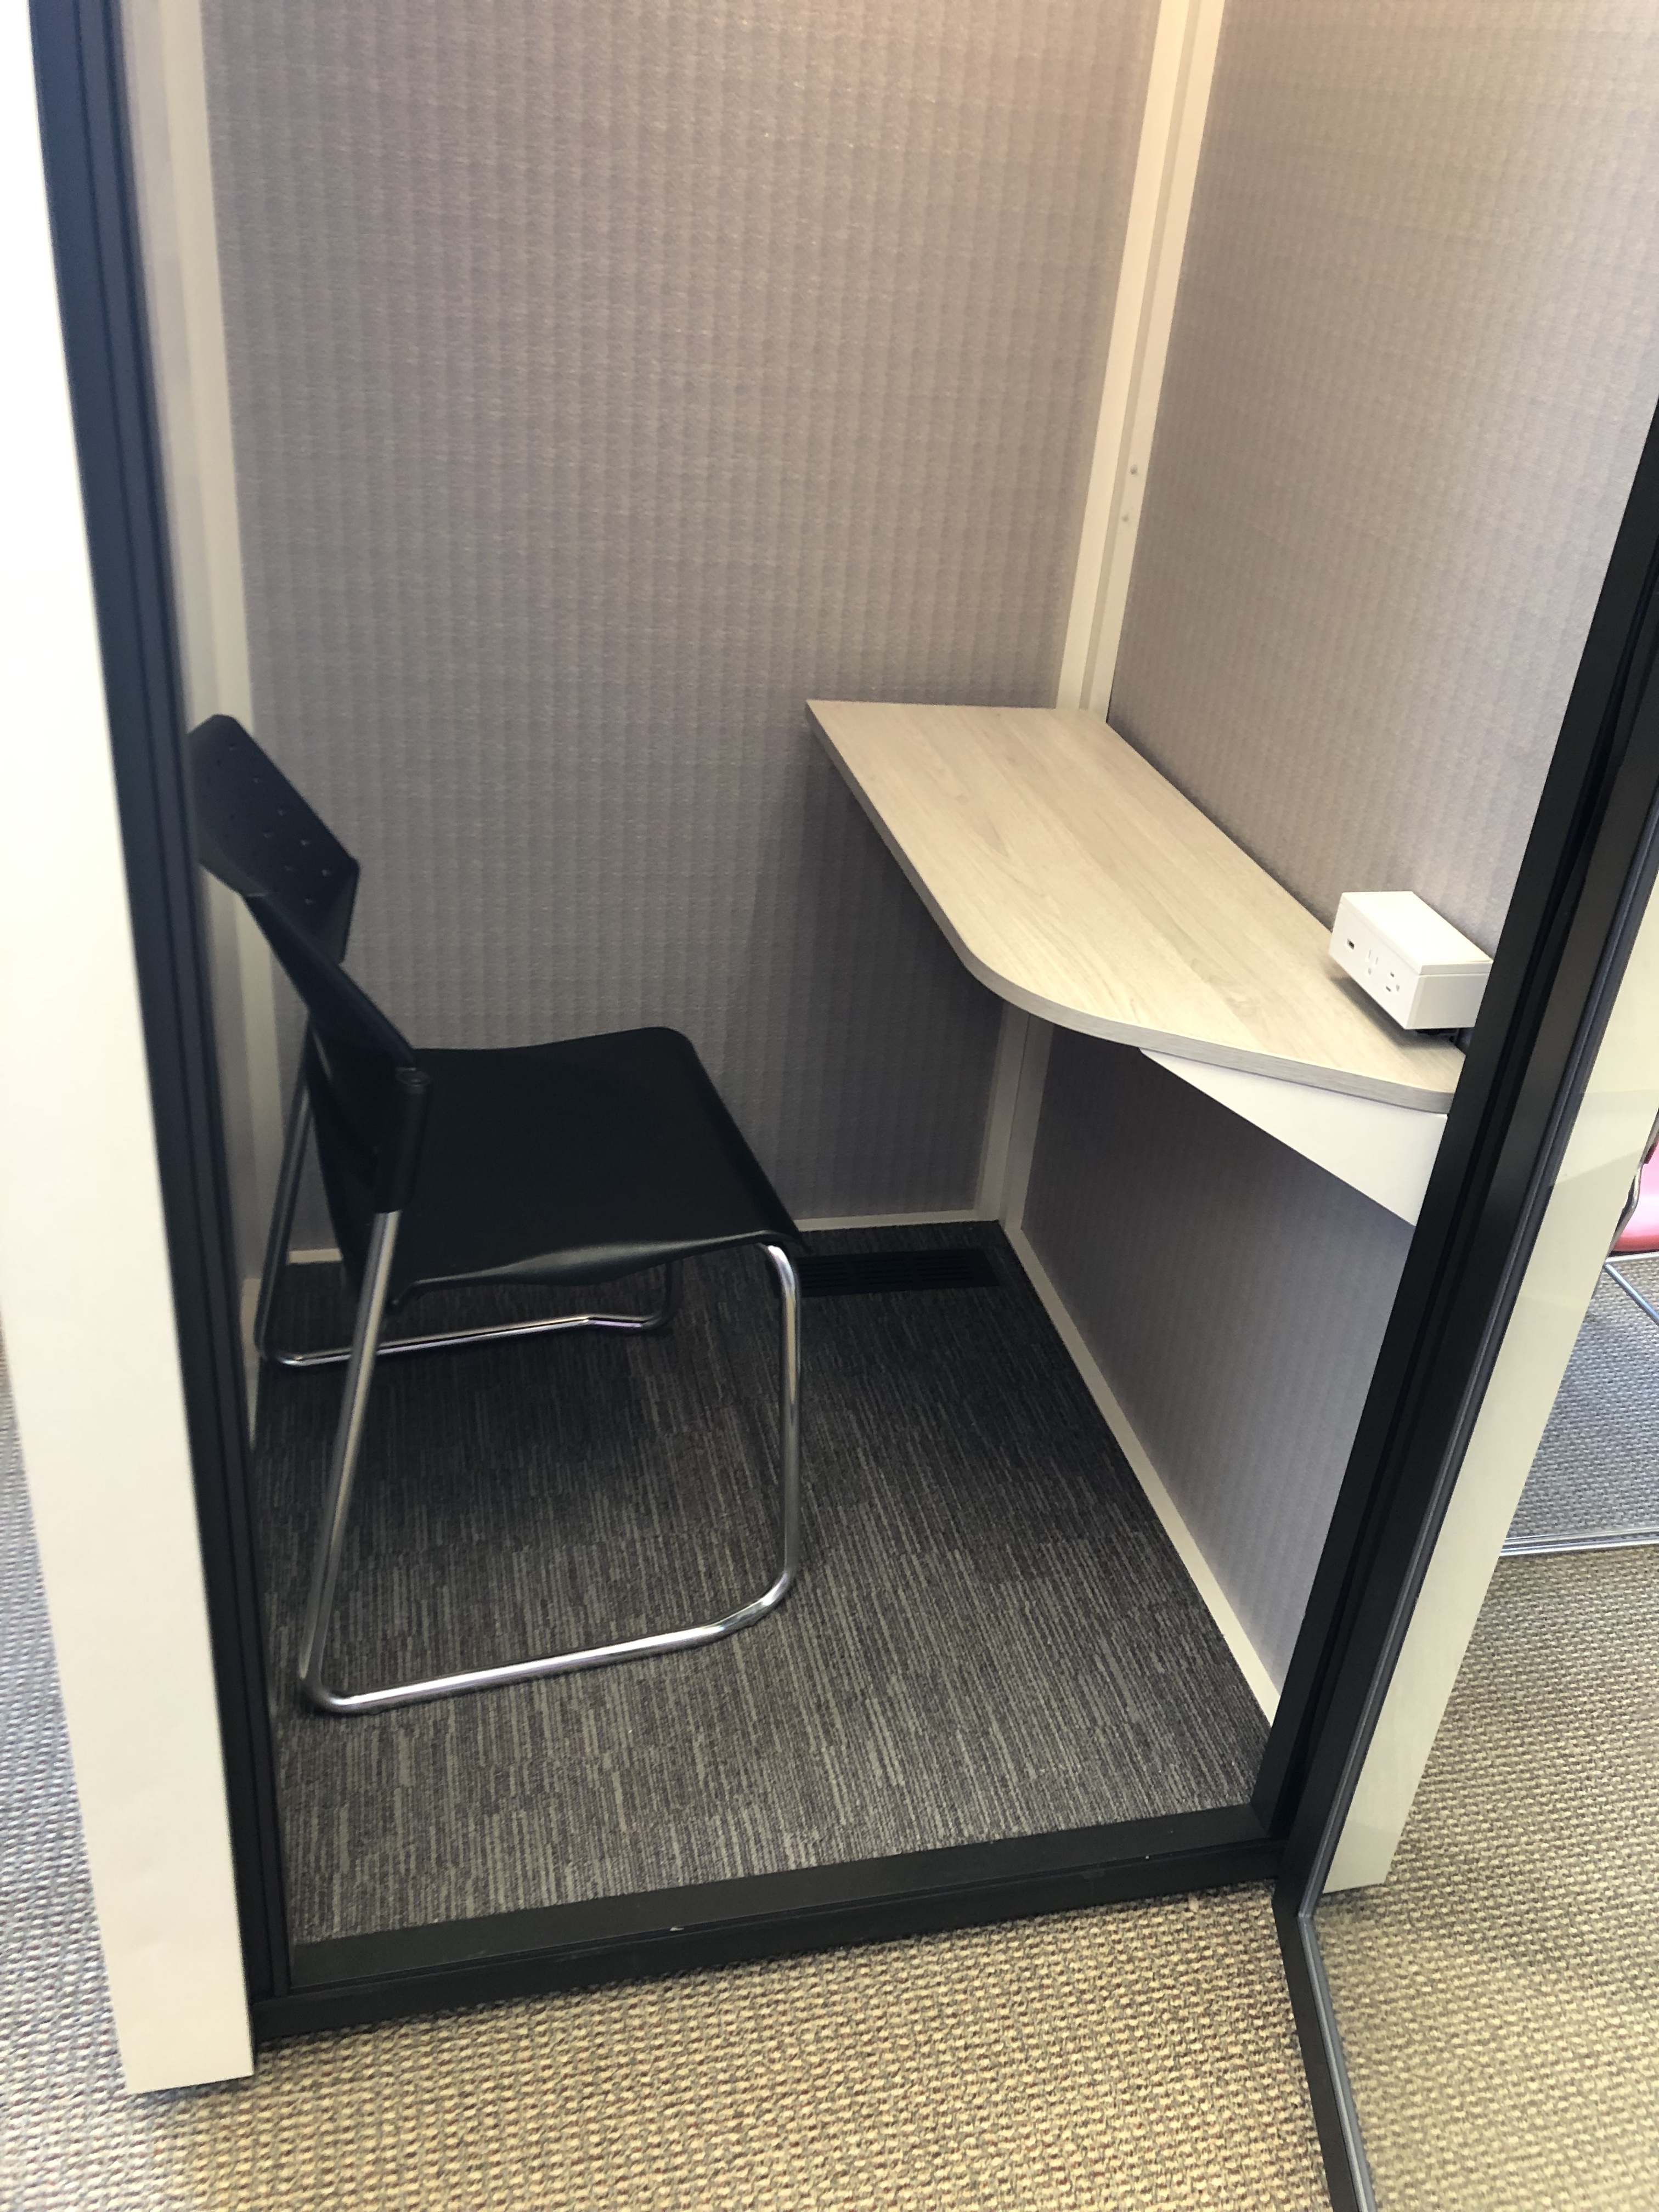 Photo of study pod showing chair, desk, and a step from floor to interior. Description of pods follows at heading 2